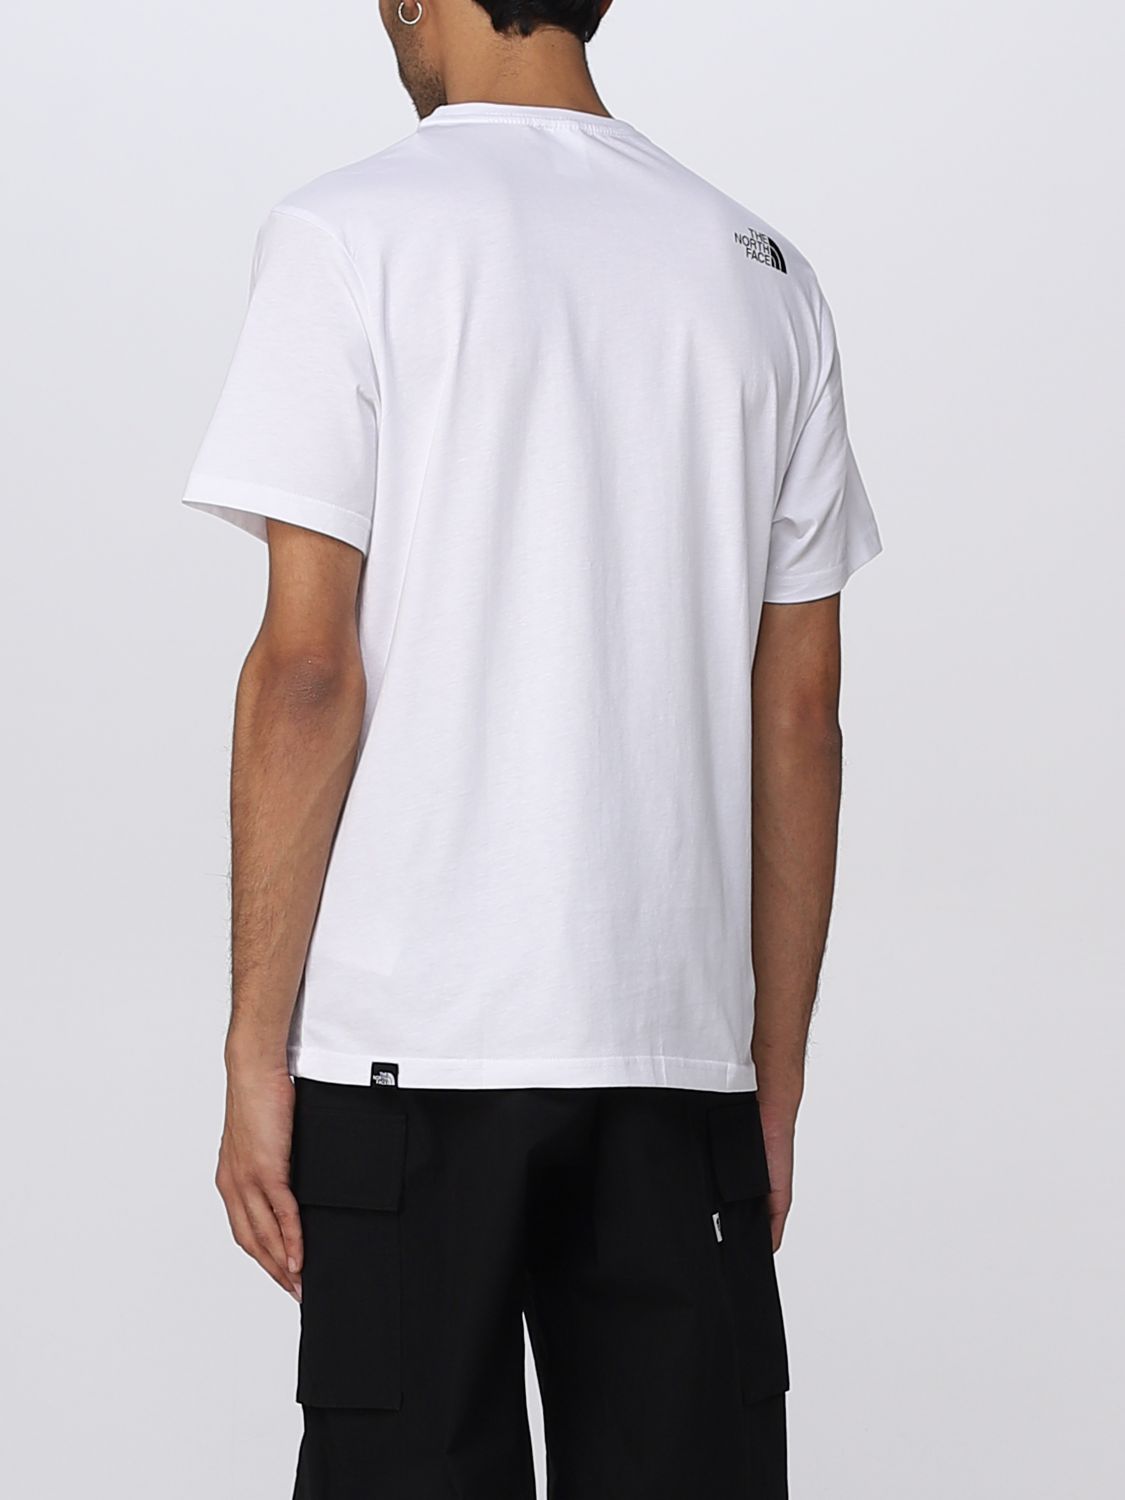 T-Shirt The North Face: The North Face Herren T-Shirt weiß 3